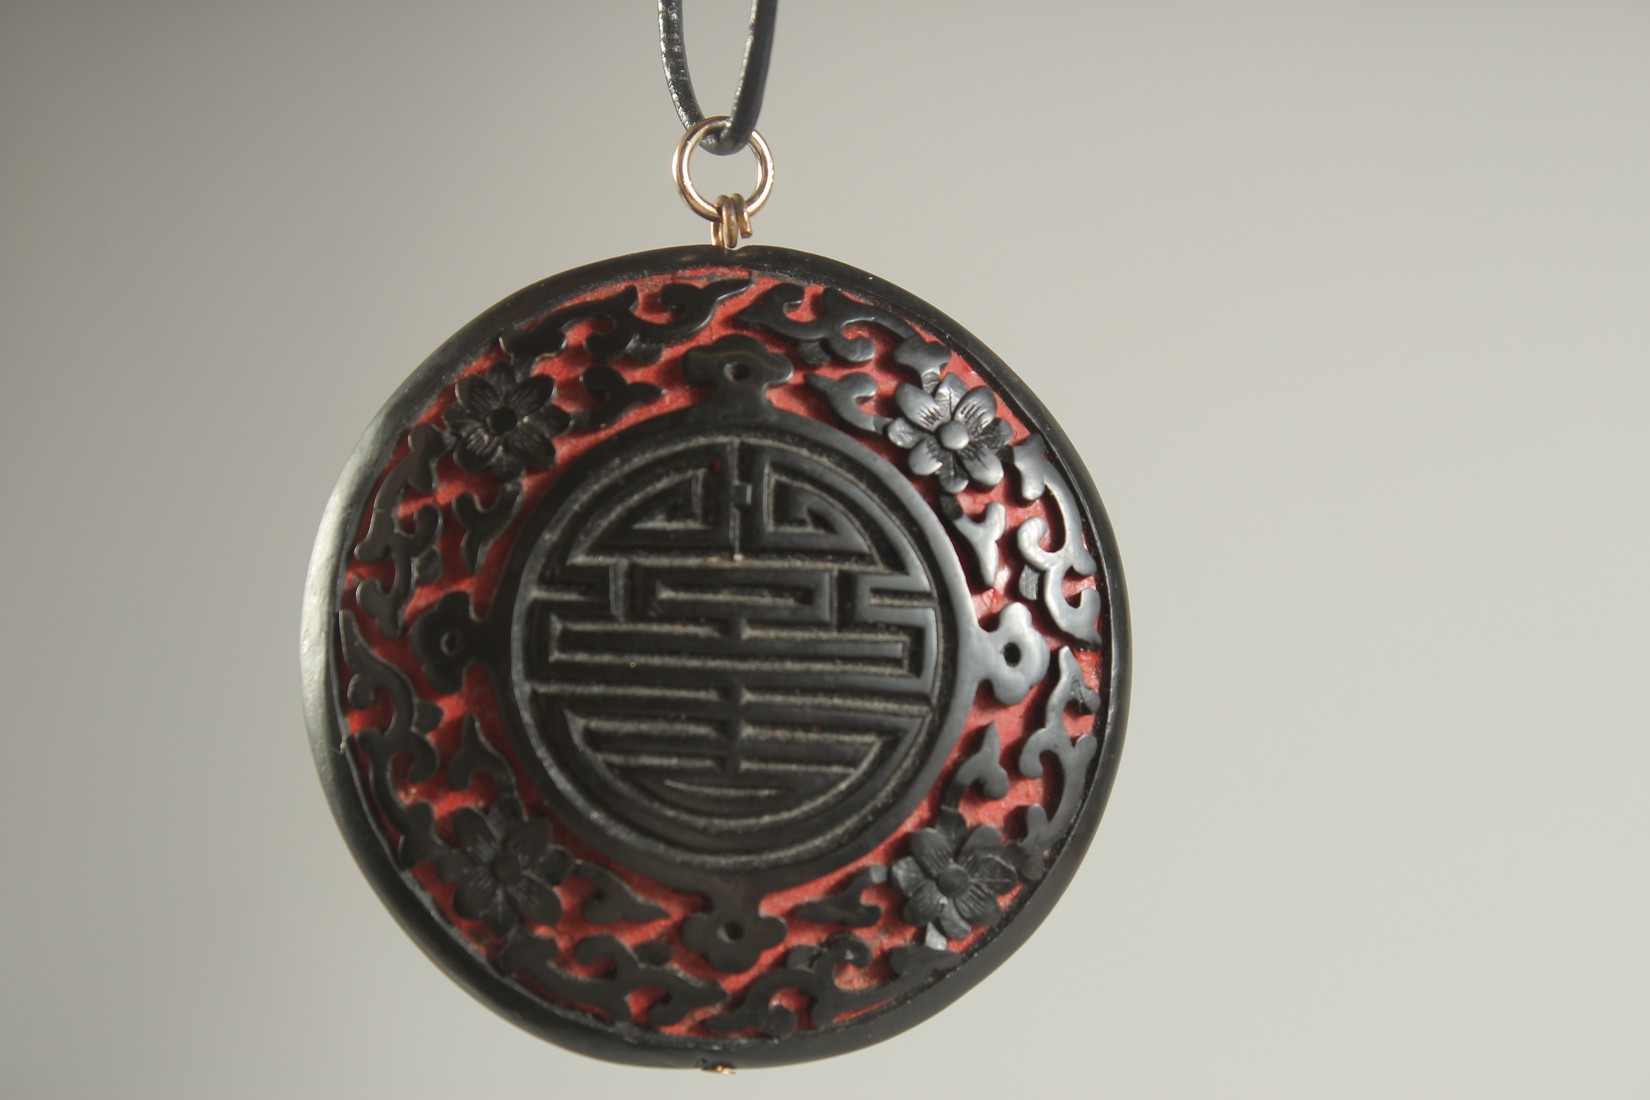 A CHINESE BLACK CINNABAR LACQUER PENDANT, 5cm diameter. - Image 2 of 2